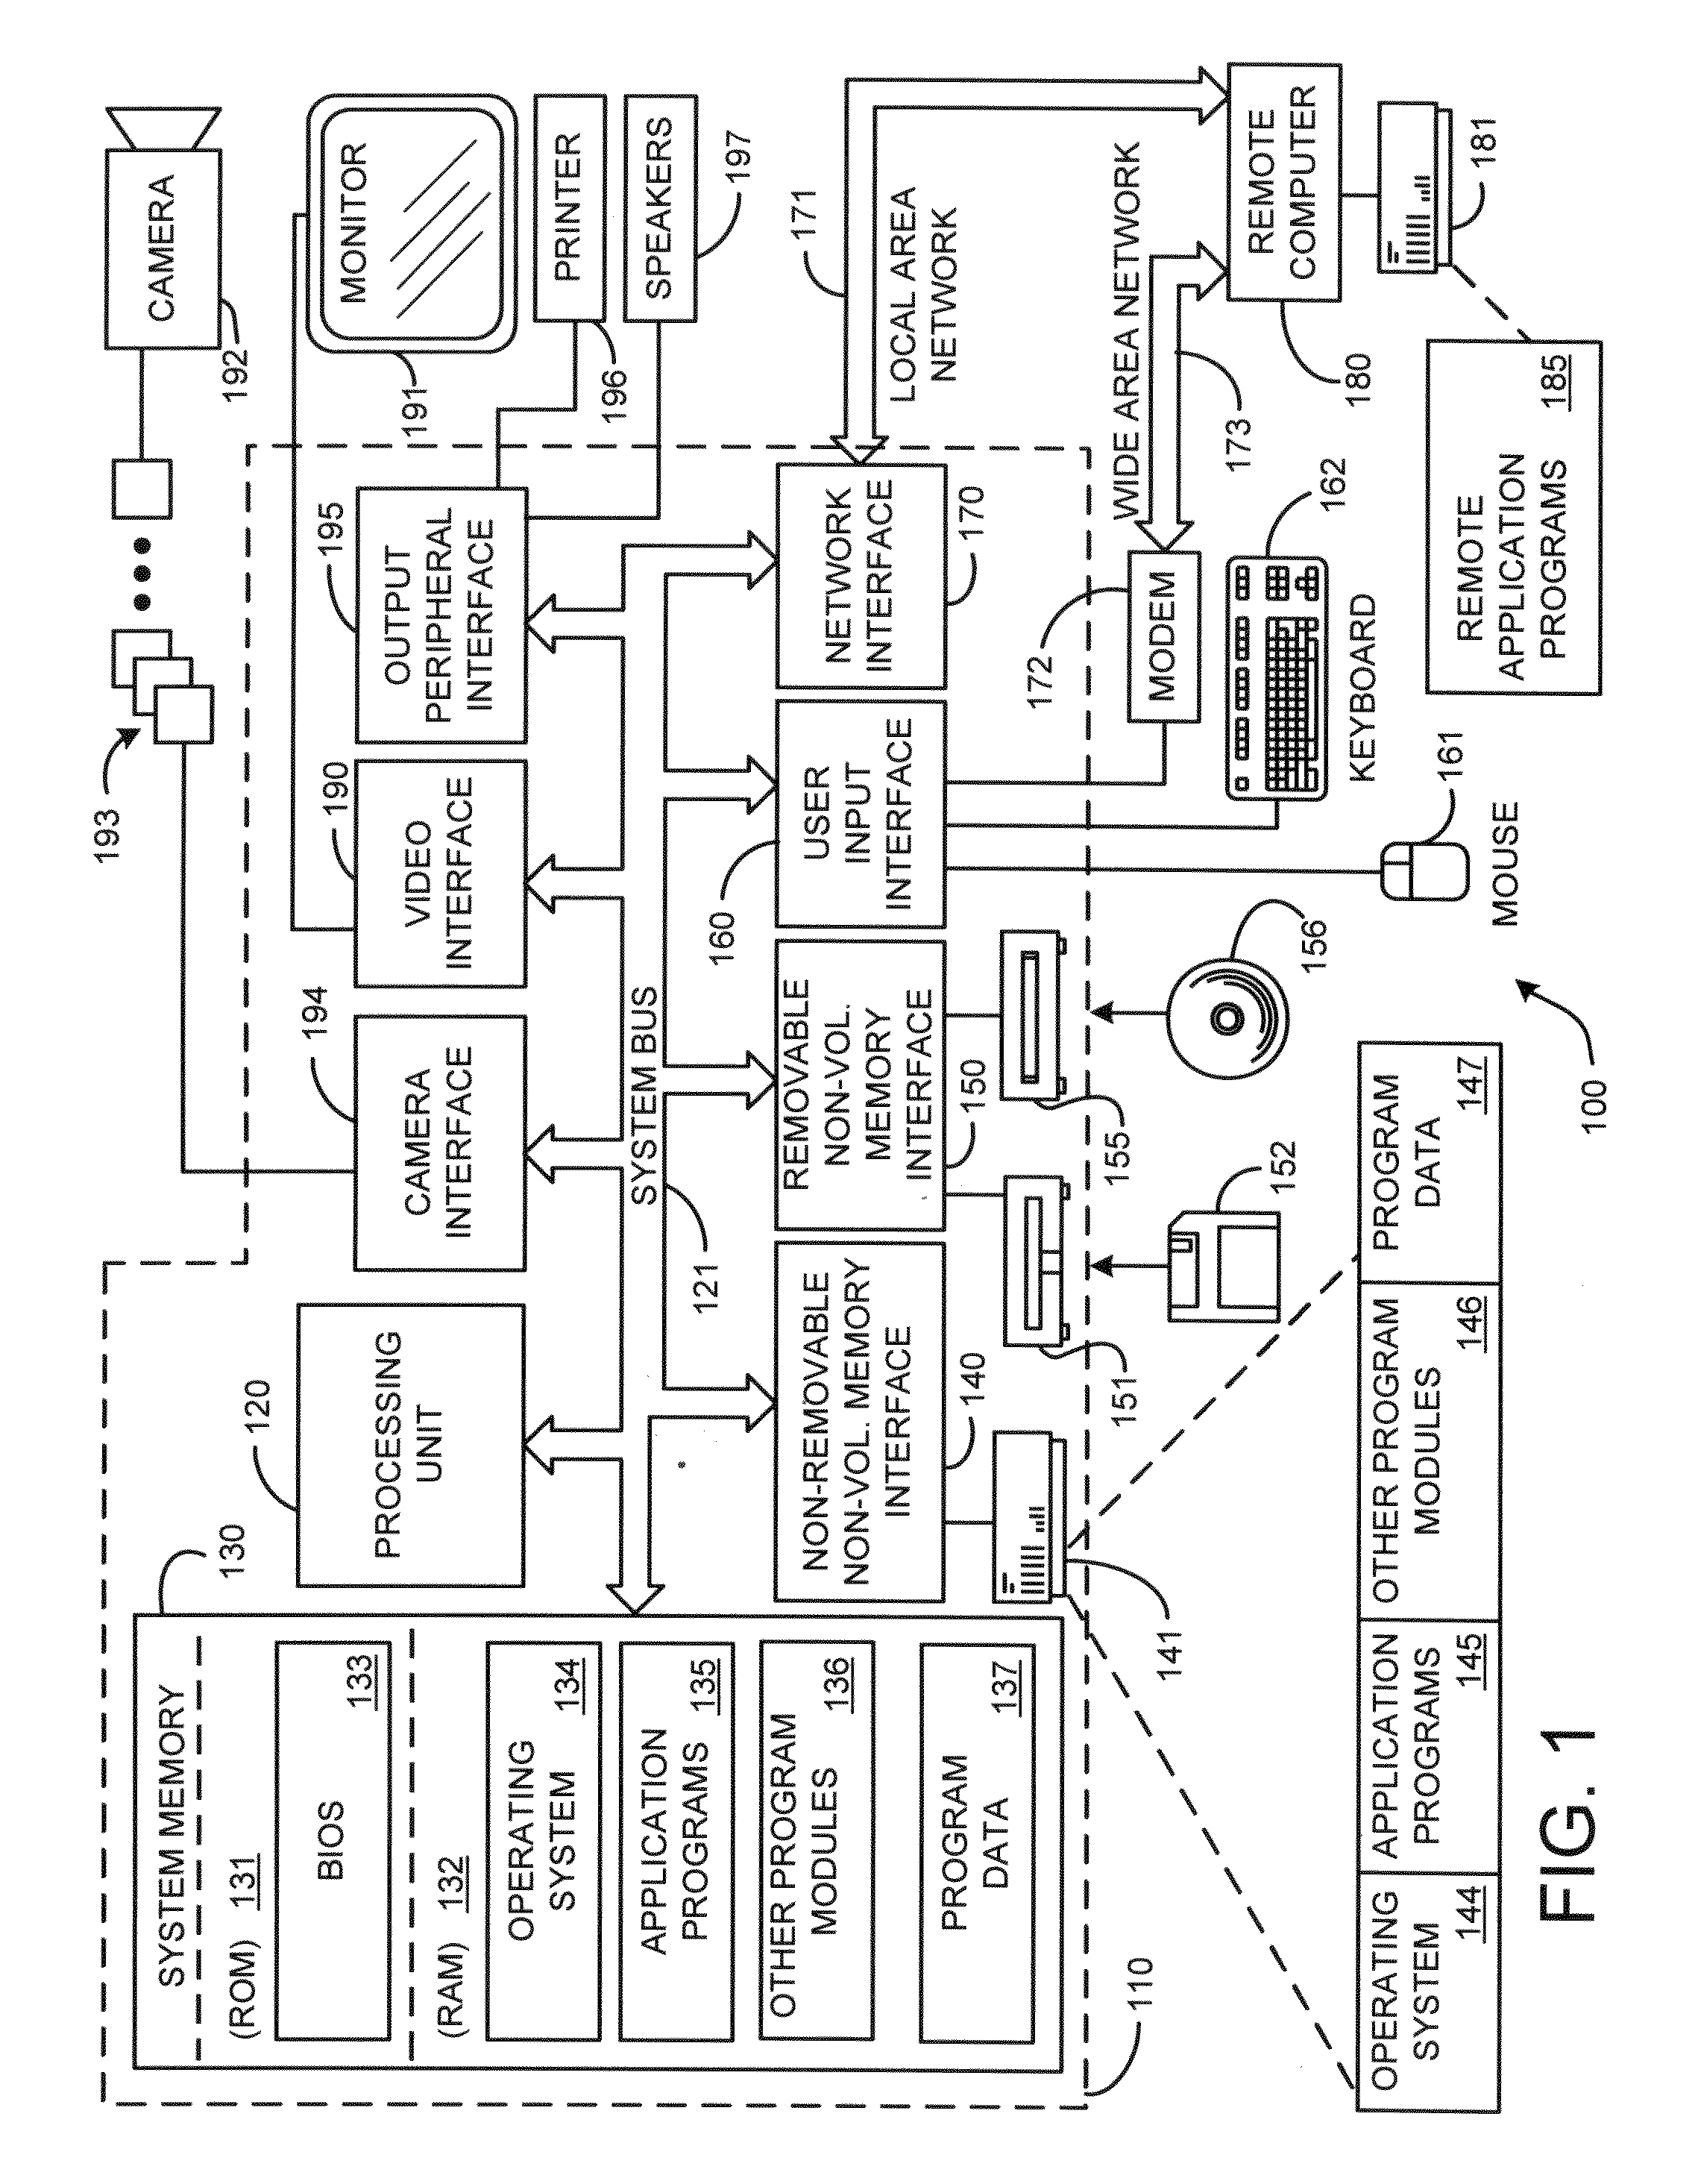 System and method for adaptive document layout via manifold content